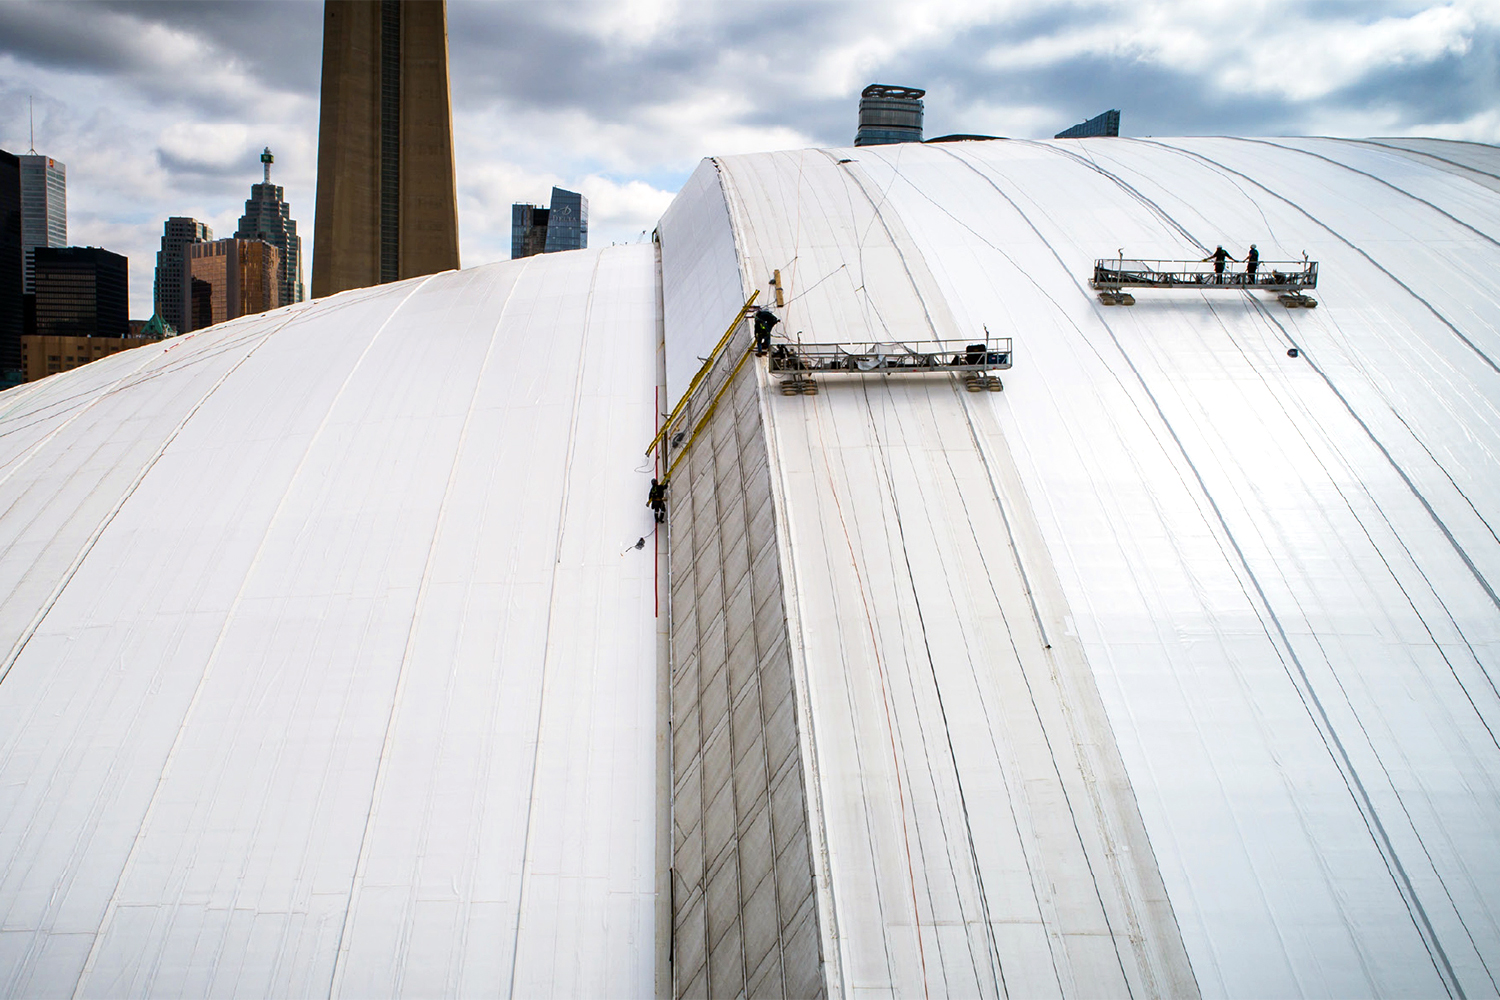 For the Rogers Centre vinyl roof replacement, Sika Sarnafil’s roofing “take back” program reduced the waste generated.